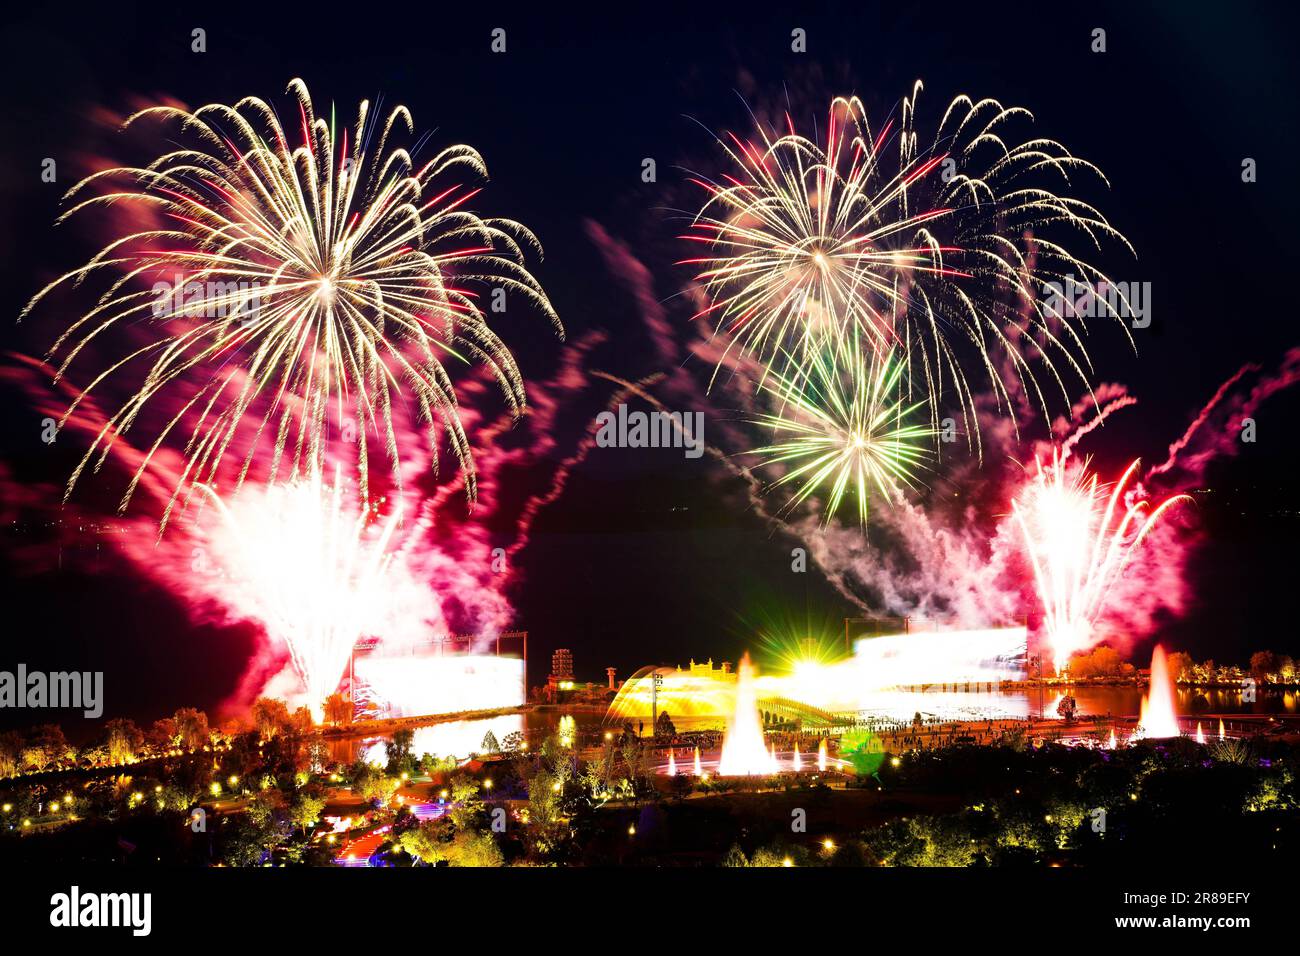 (230620) -- QUFU, June 20, 2023 (Xinhua) -- A light show is performed at the Nishan Sacredland in Qufu City, east China's Shandong Province, May 8, 2023. Qufu City, located in east China's Shandong Province, is the birthplace of ancient Chinese sage Confucius. The Cemetery of Confucius, the Confucius Temple and the Kong family mansion in Qufu are among venues for people to commemorate ancient Chinese sages and important places for education and research tour on the fine traditional Chinese culture. In addition, the Chinese Confucius Research Institute, the Nishan Sacredland and the Conf Stock Photo